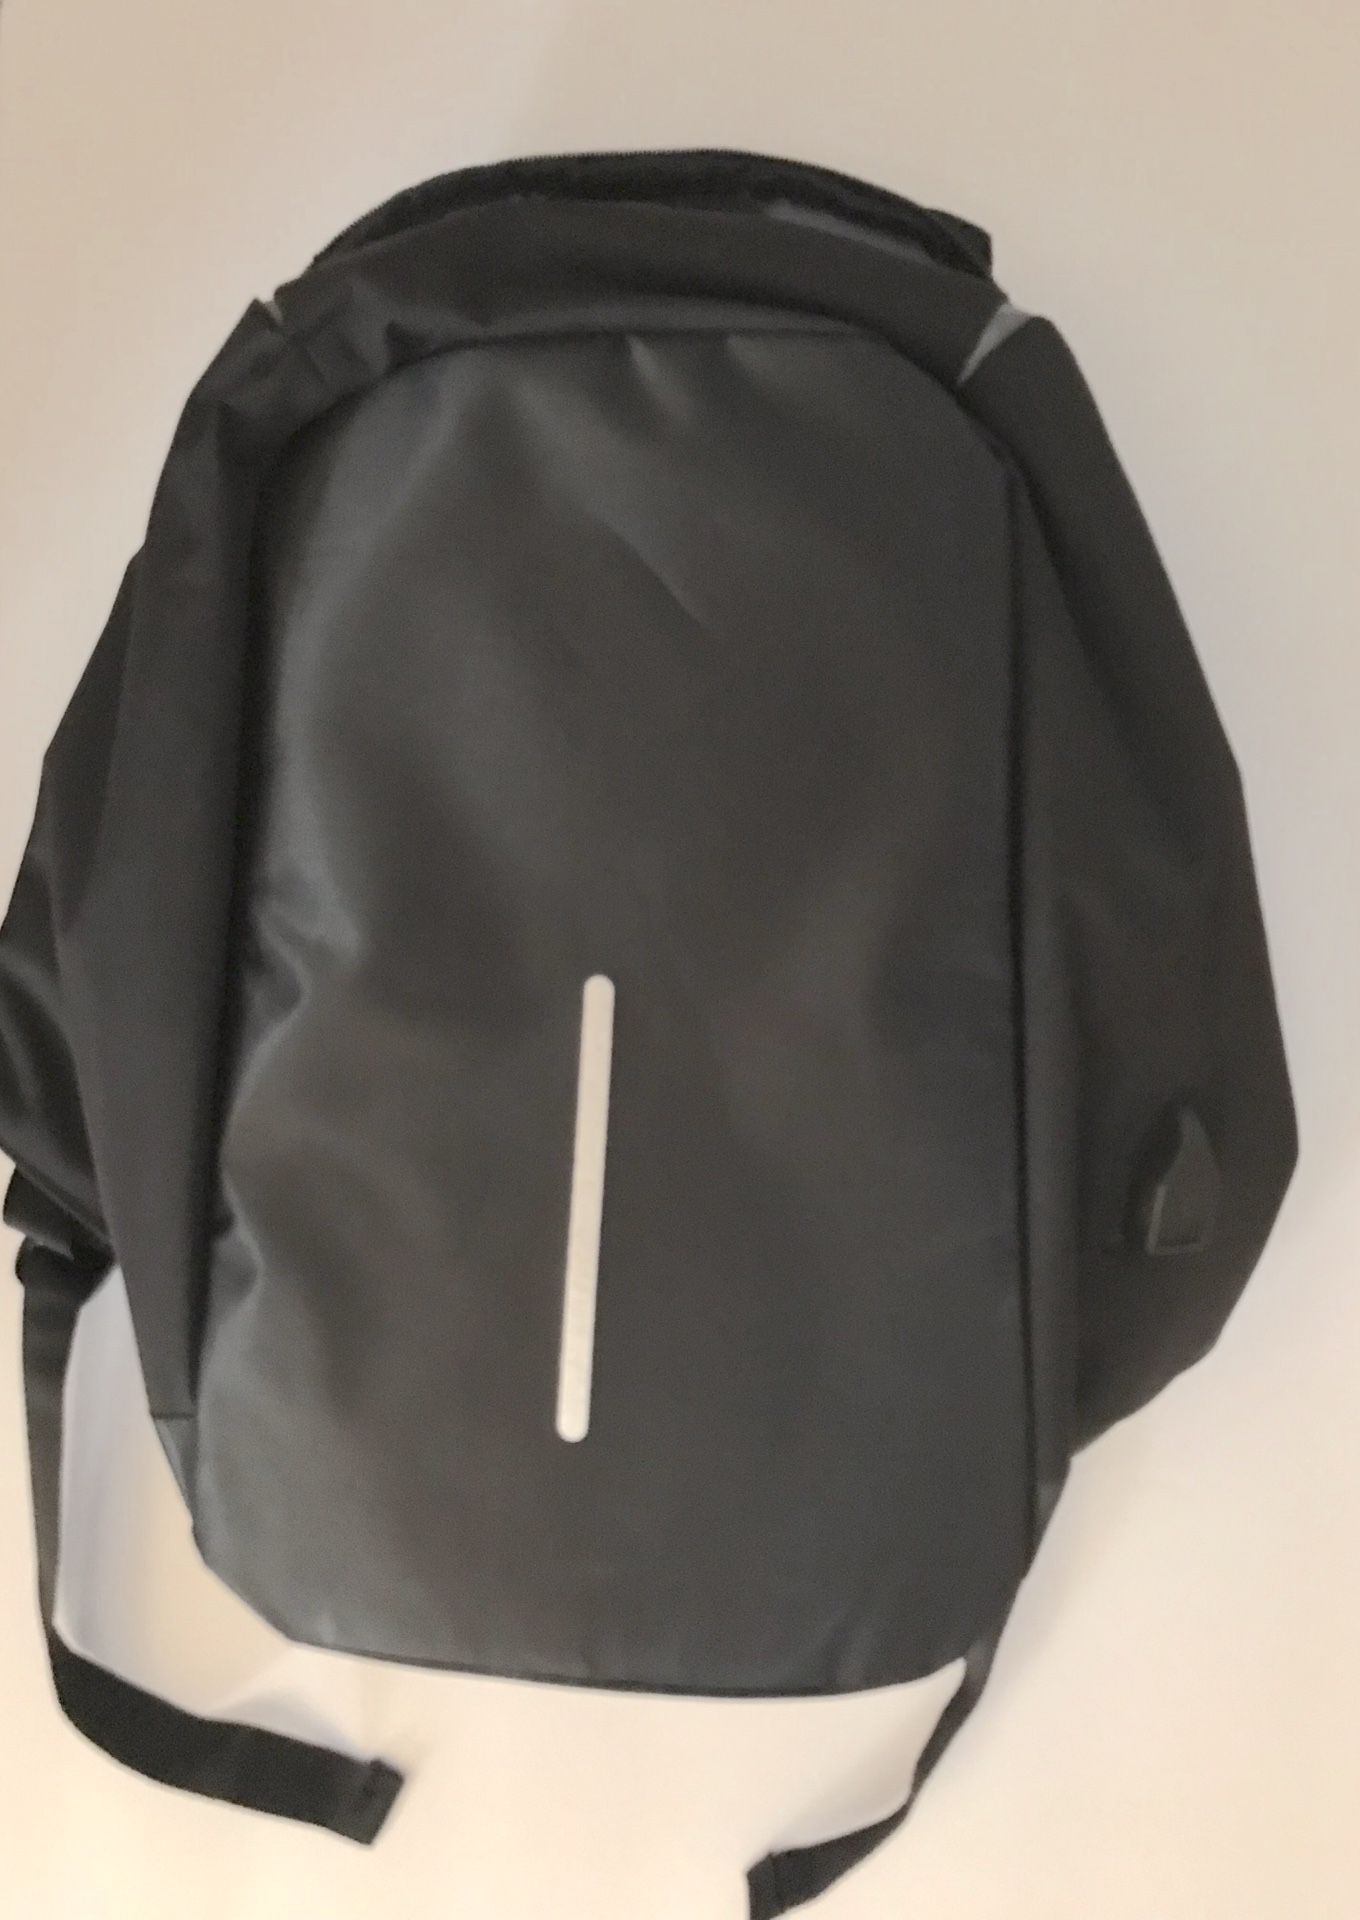 Waterproof Men’s Backpack USB charging for Laptops 14” or less